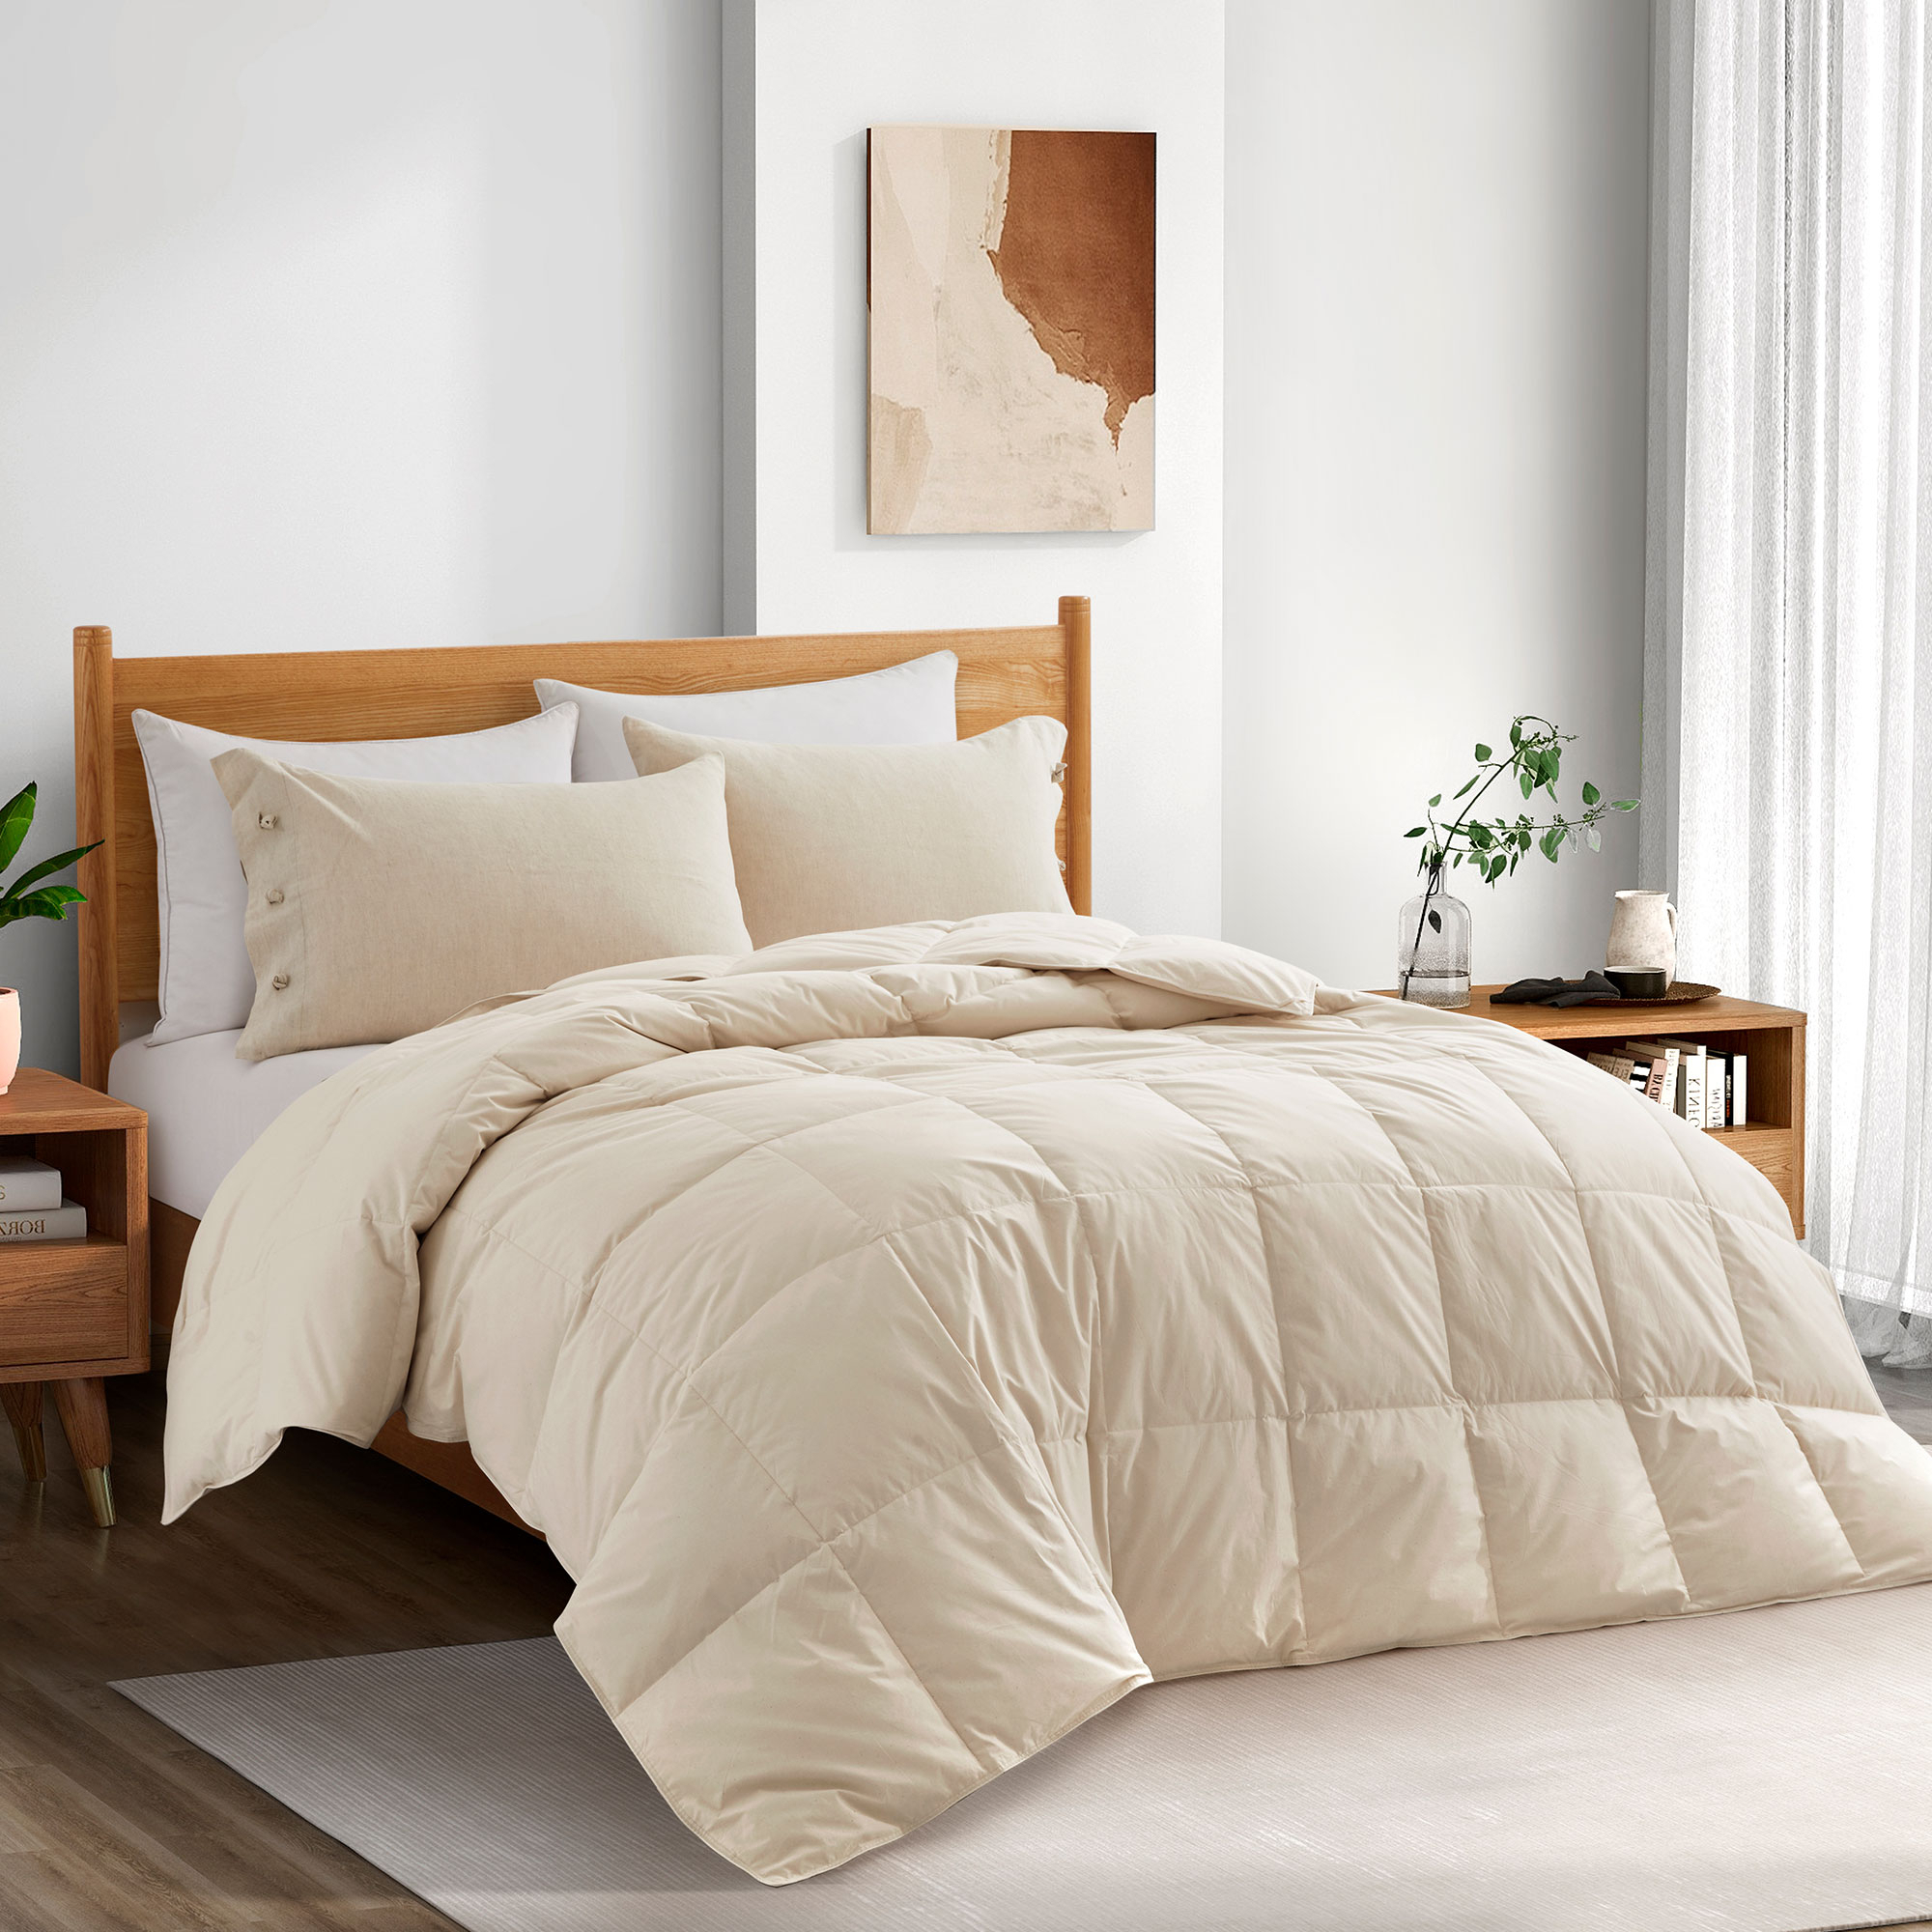 All Season Organic Cotton Comforter Filled With Down And Feather Fiber - Fawn, Full/Queen